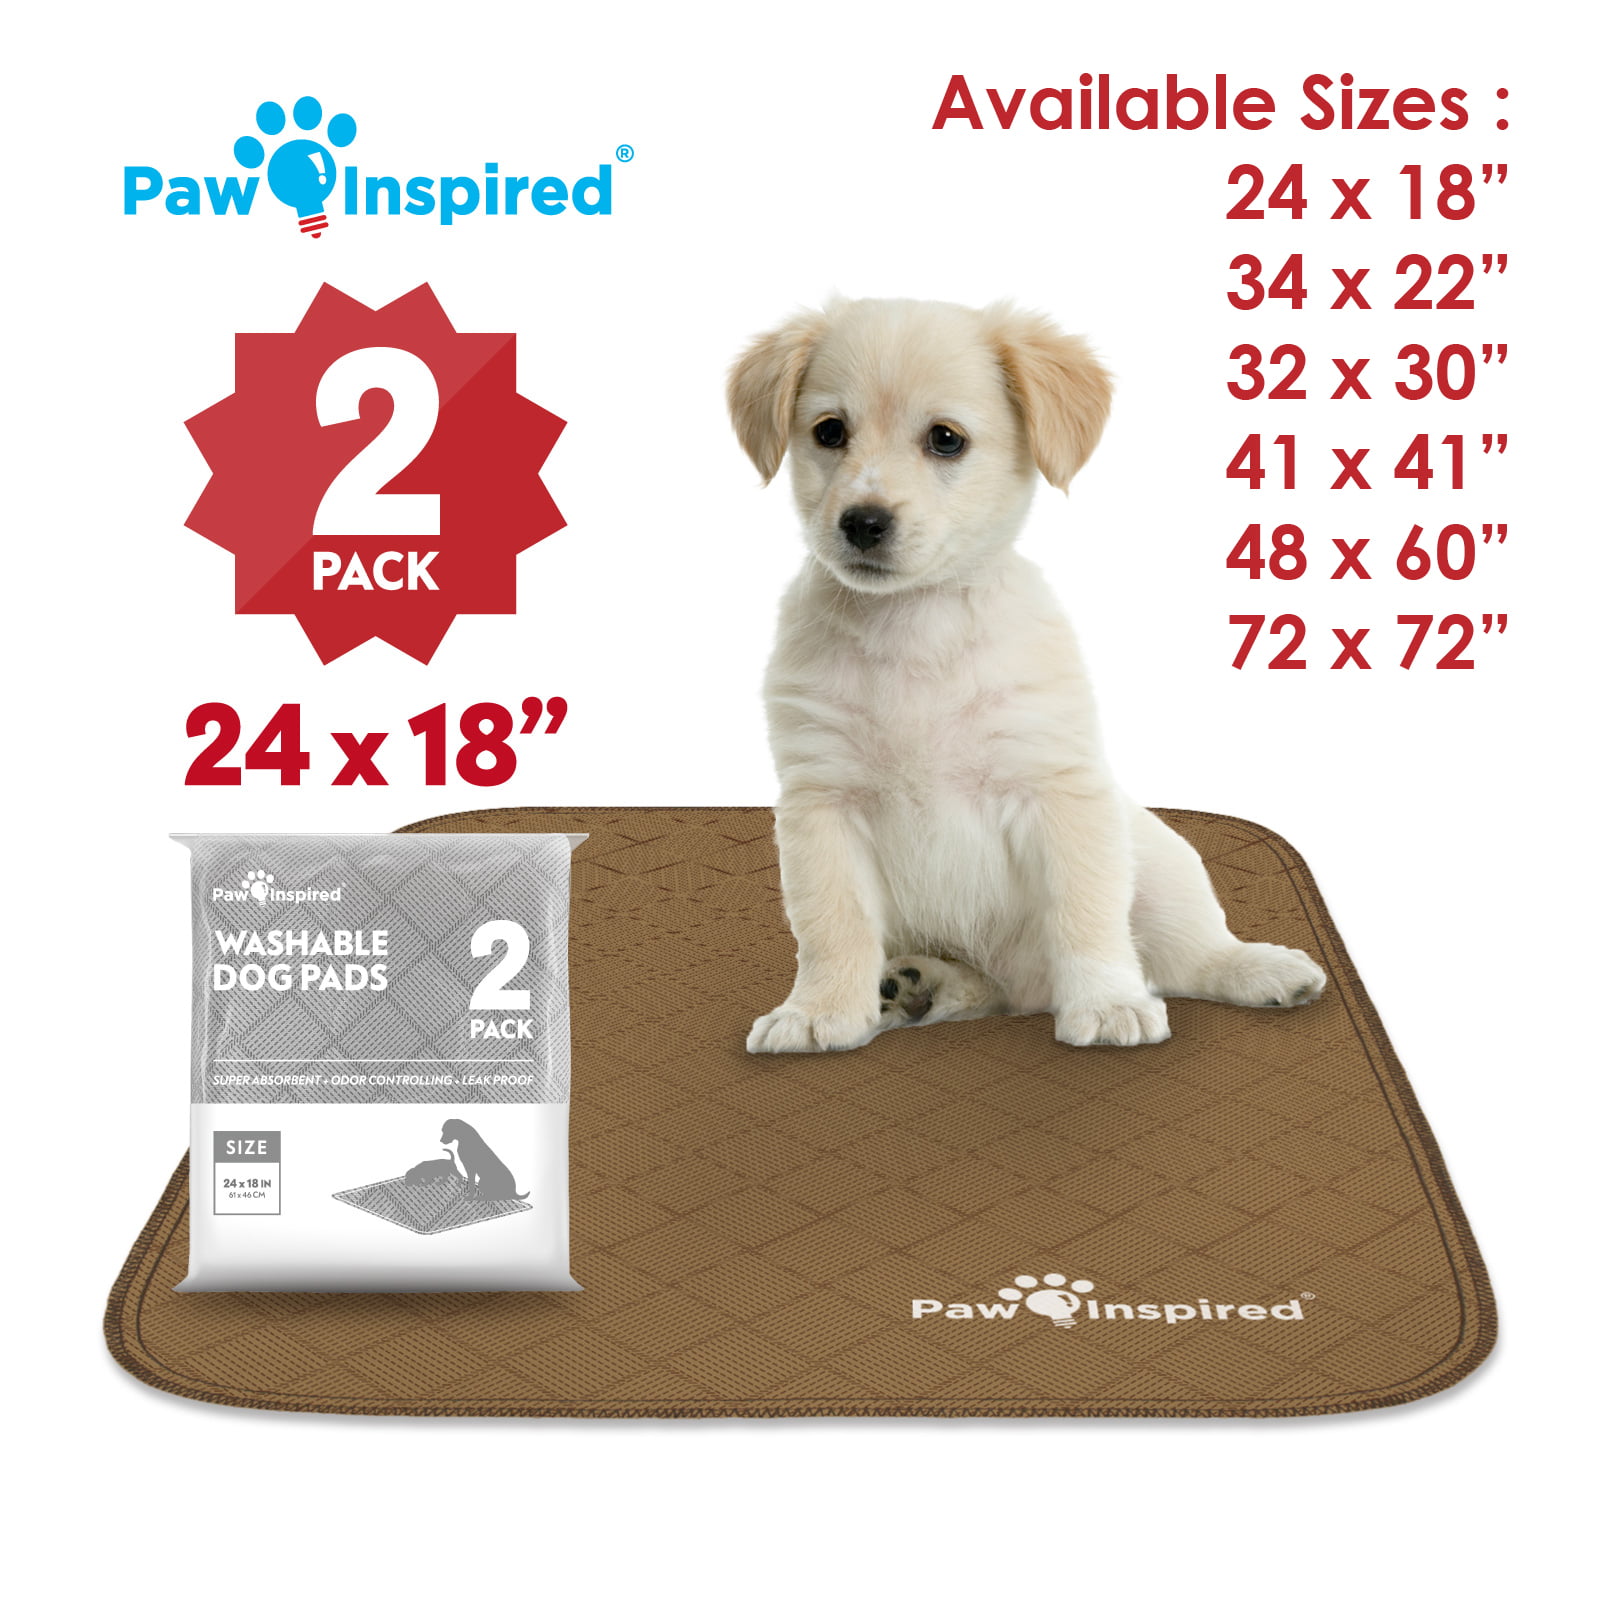 100 WAVE DRY PLUS QUILTED 30x30 Dog Puppy Pee Pads Training Wee Wee Underpads 